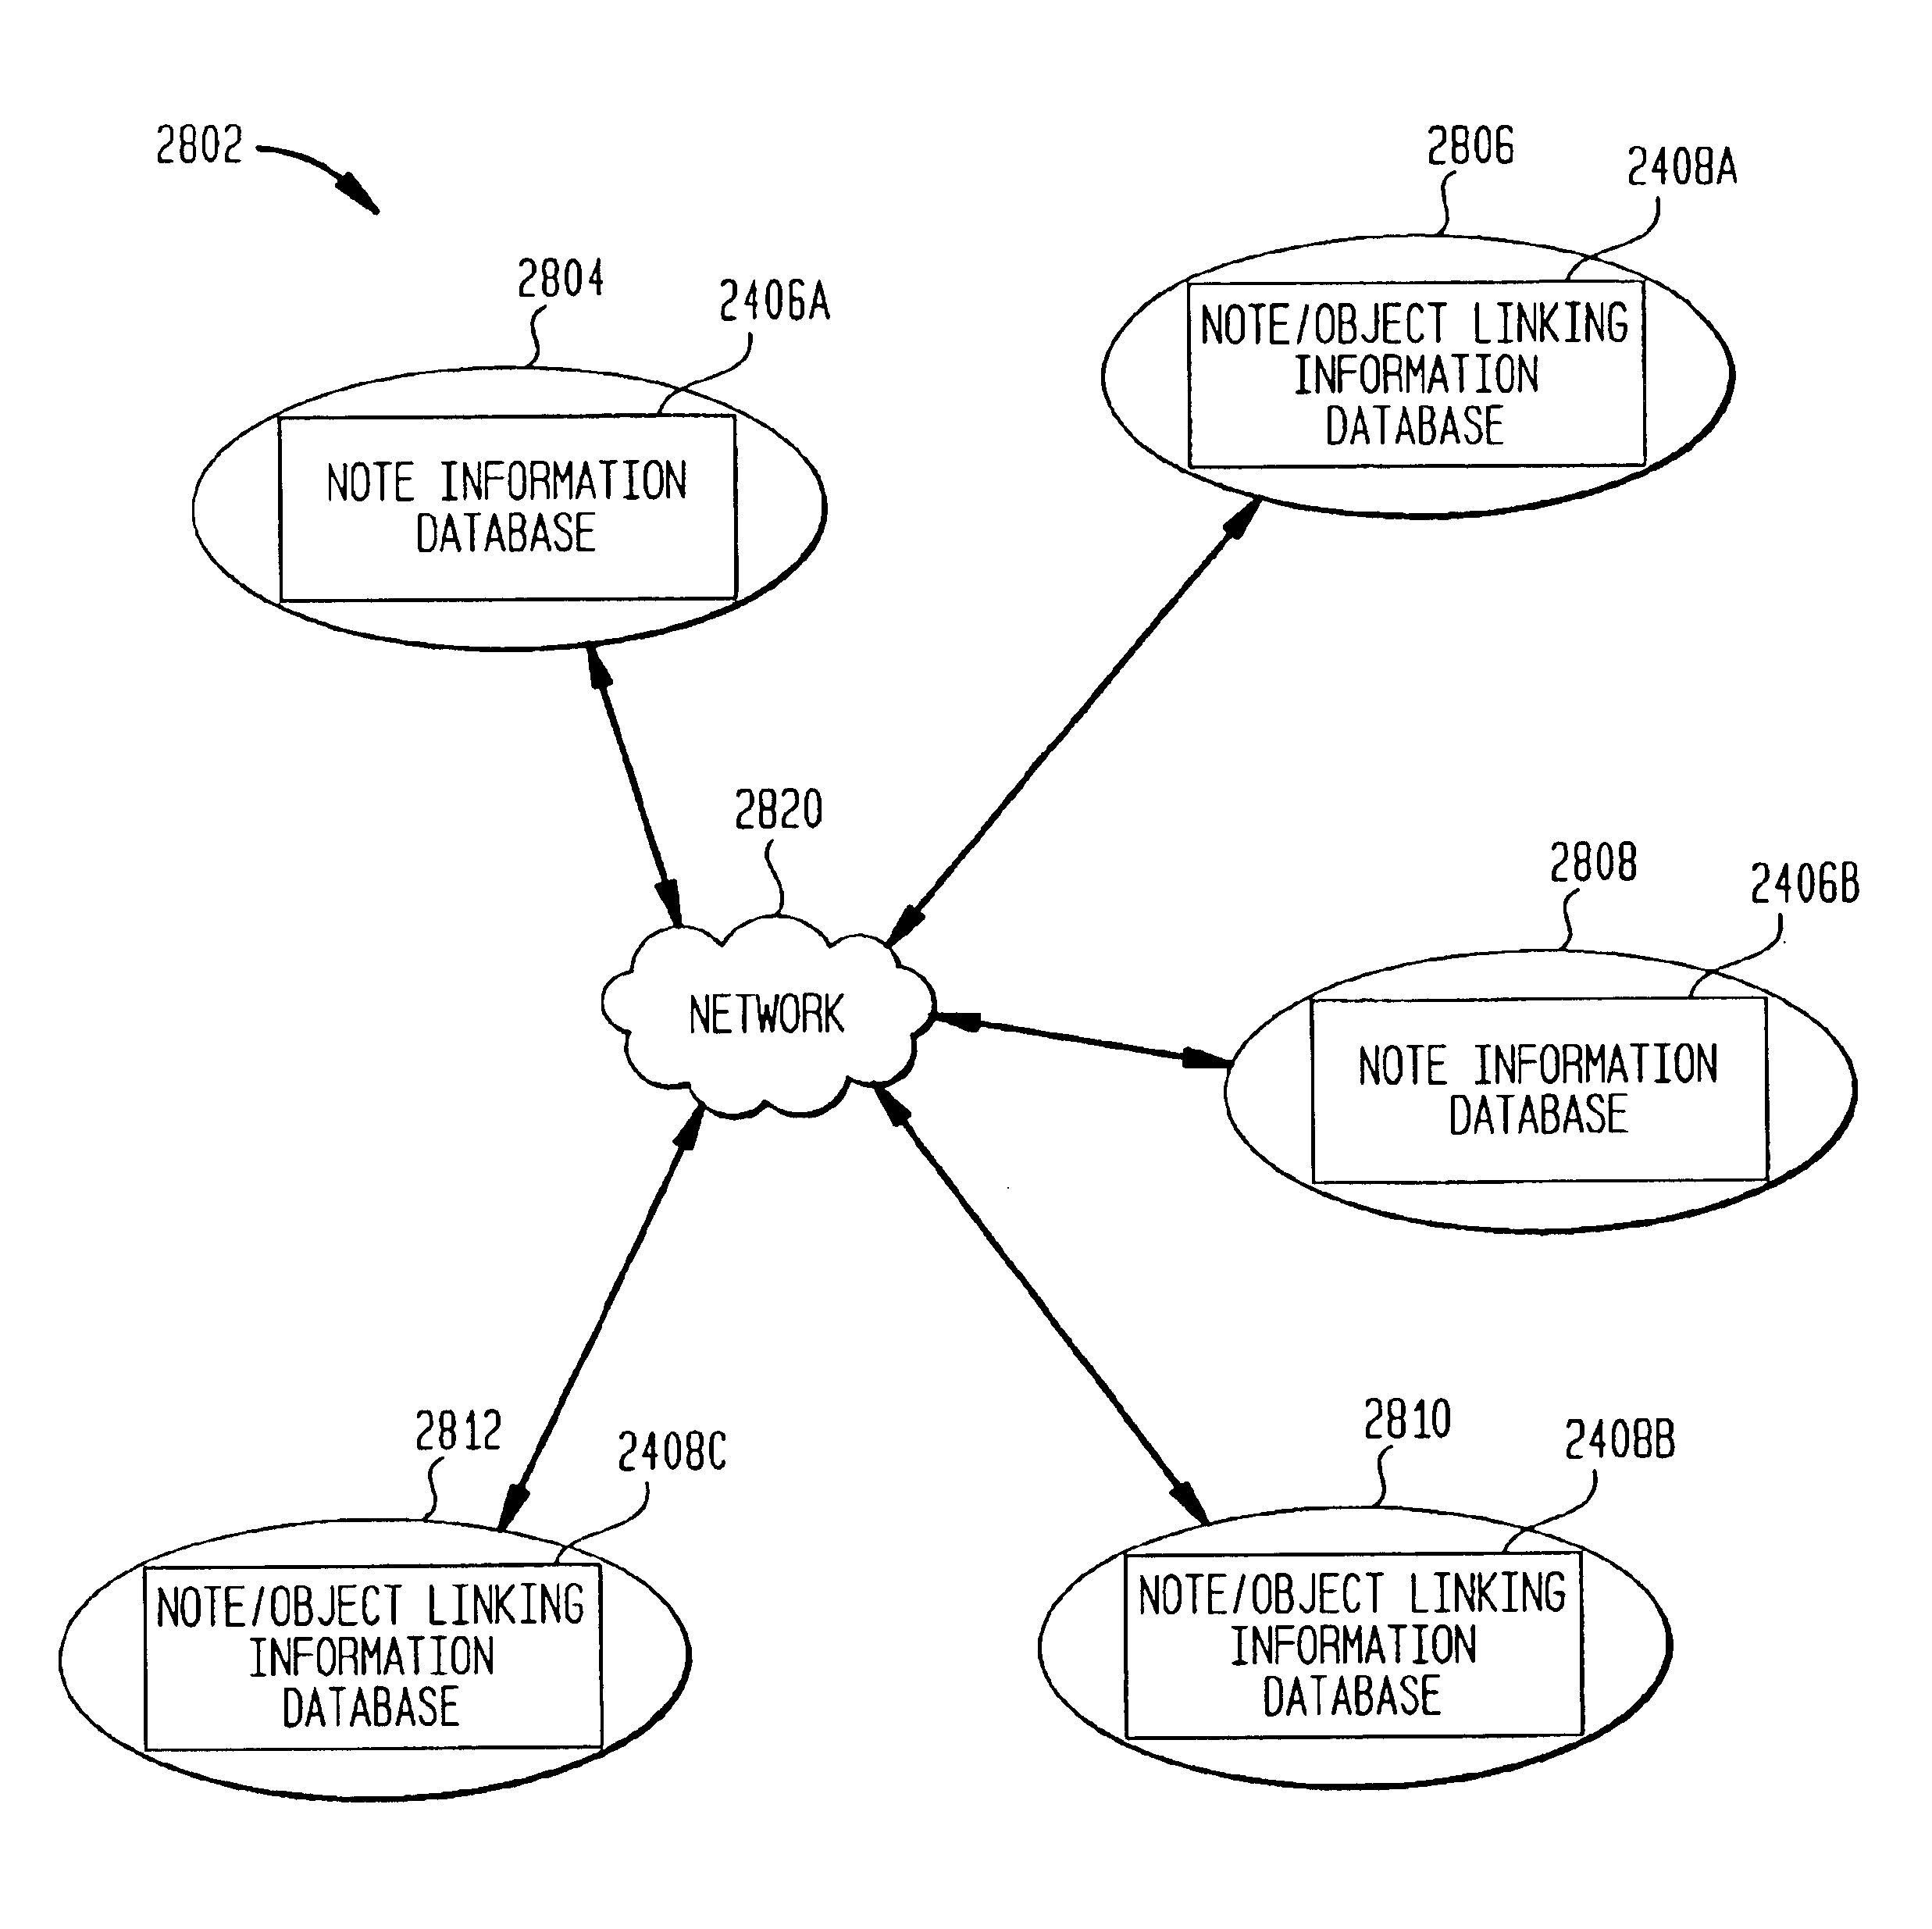 System, method and computer program product for mediating notes and note sub-notes linked or otherwise associated with stored or networked web pages